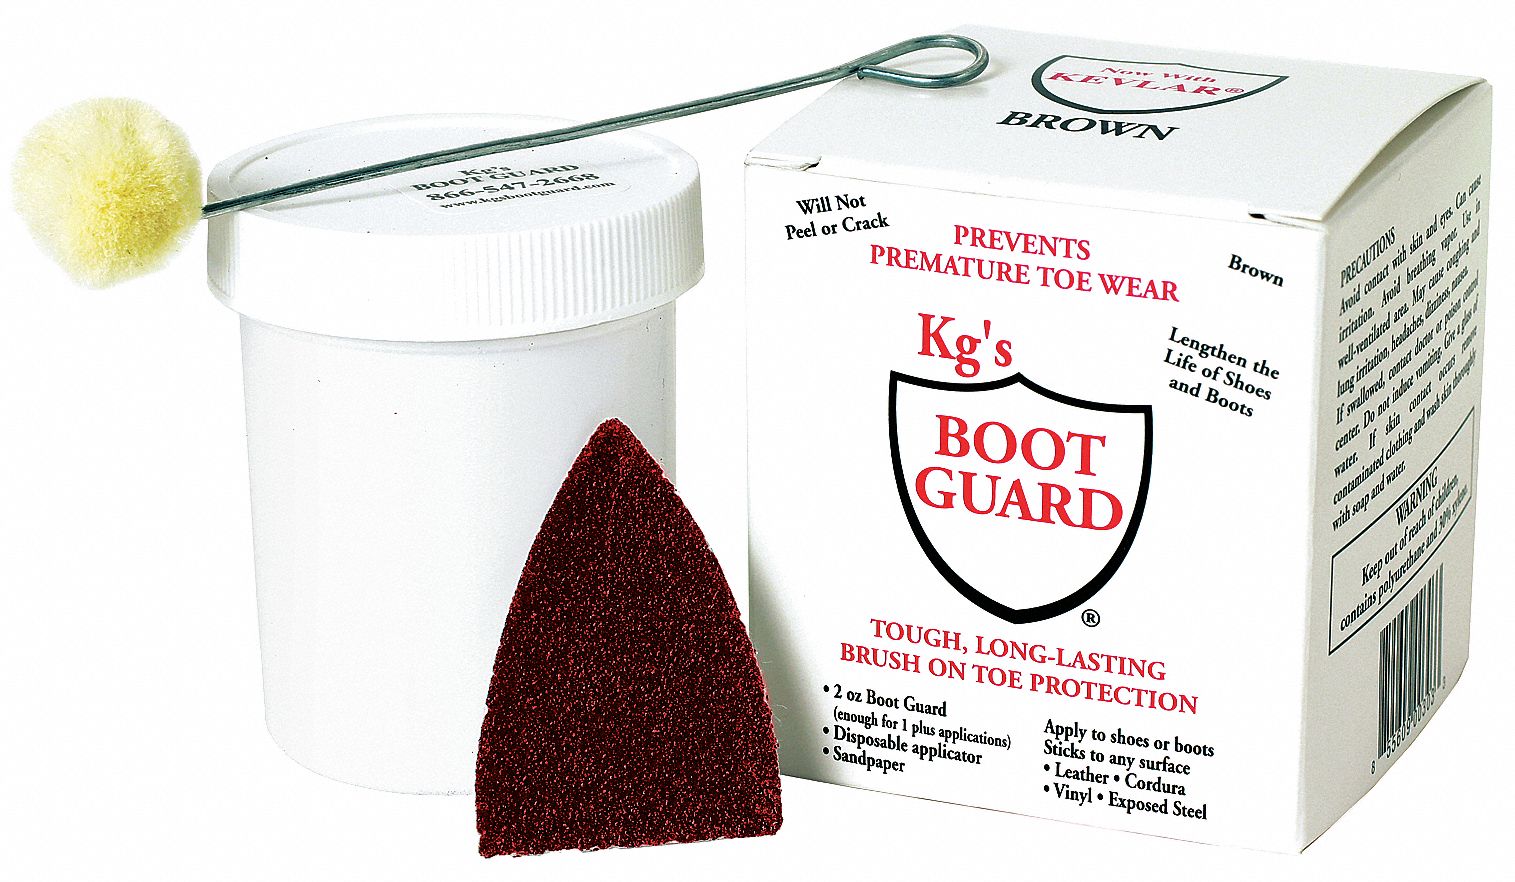 Boot Guard: Brown, New or Used Leather, Rubber, Bordura, Vinyl and Steel Boots, Polyurethane, 2 oz